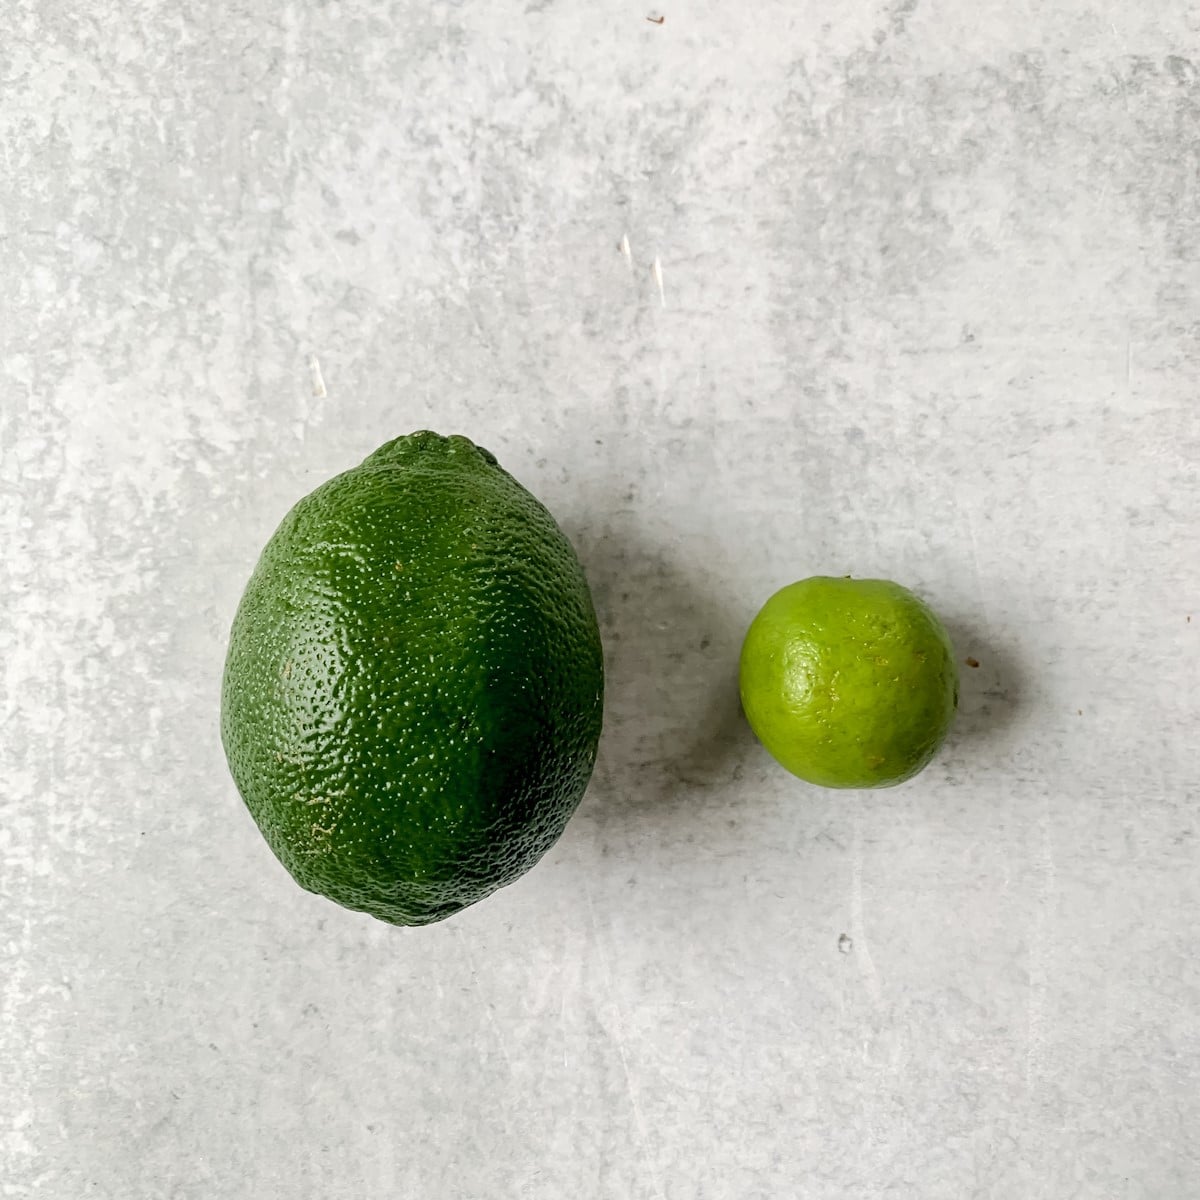 Regular lime and key lime side by side.